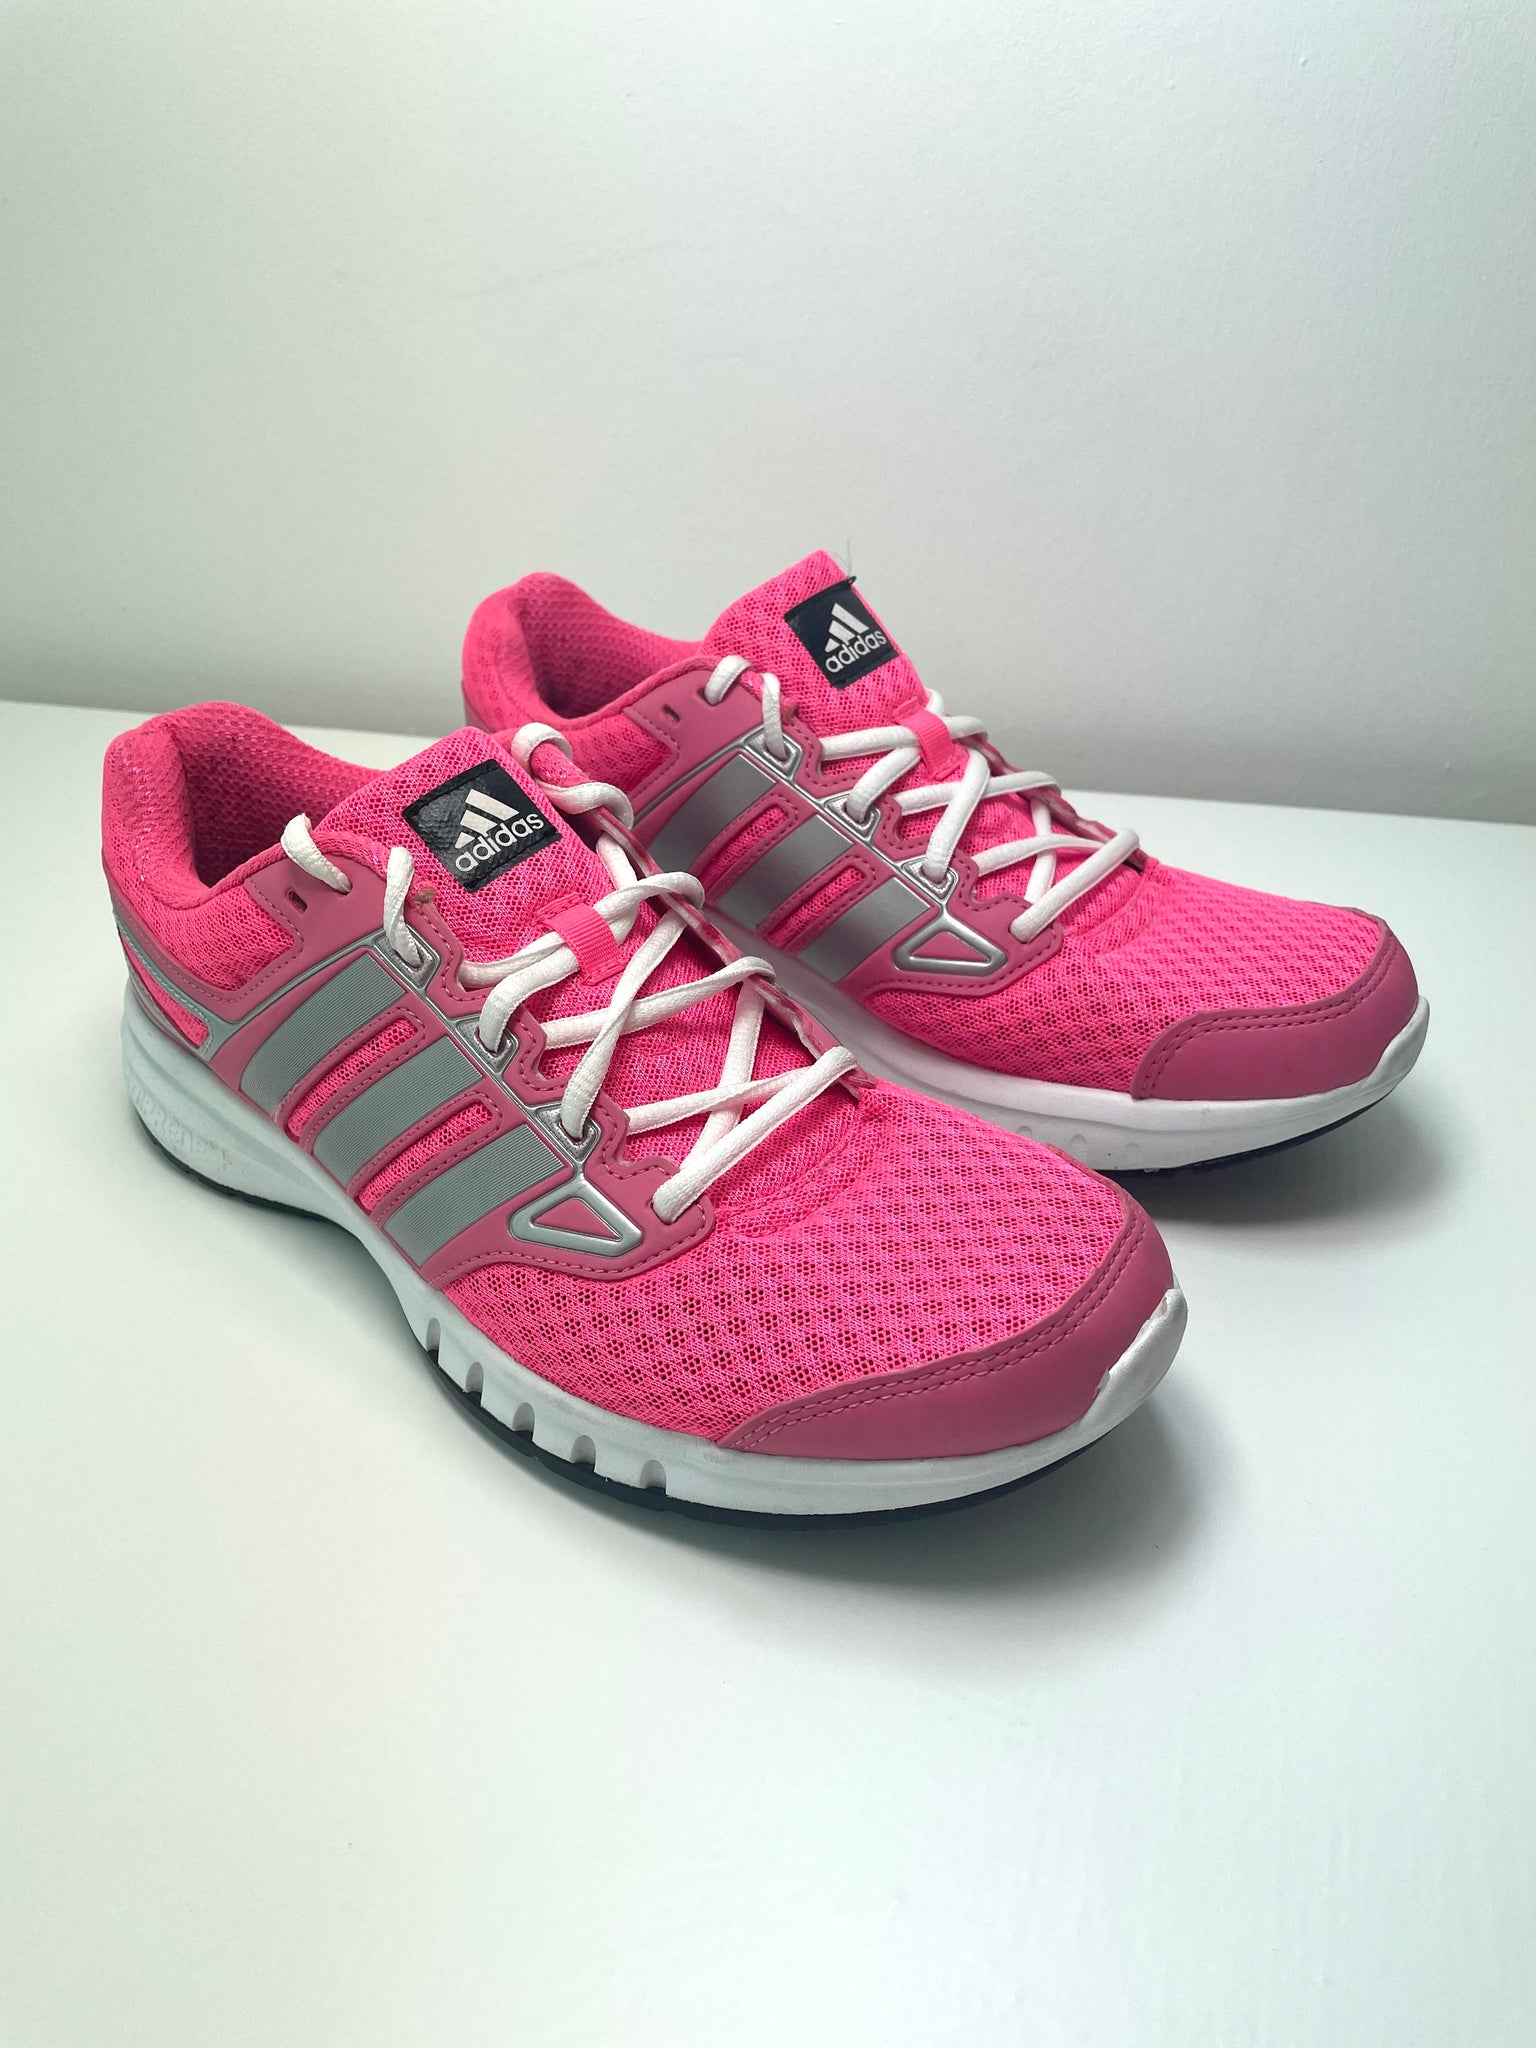 Falange modelo Imbécil Adidas Adiprene Plus Trainers Running Shoes in Pink – Clearo Limited